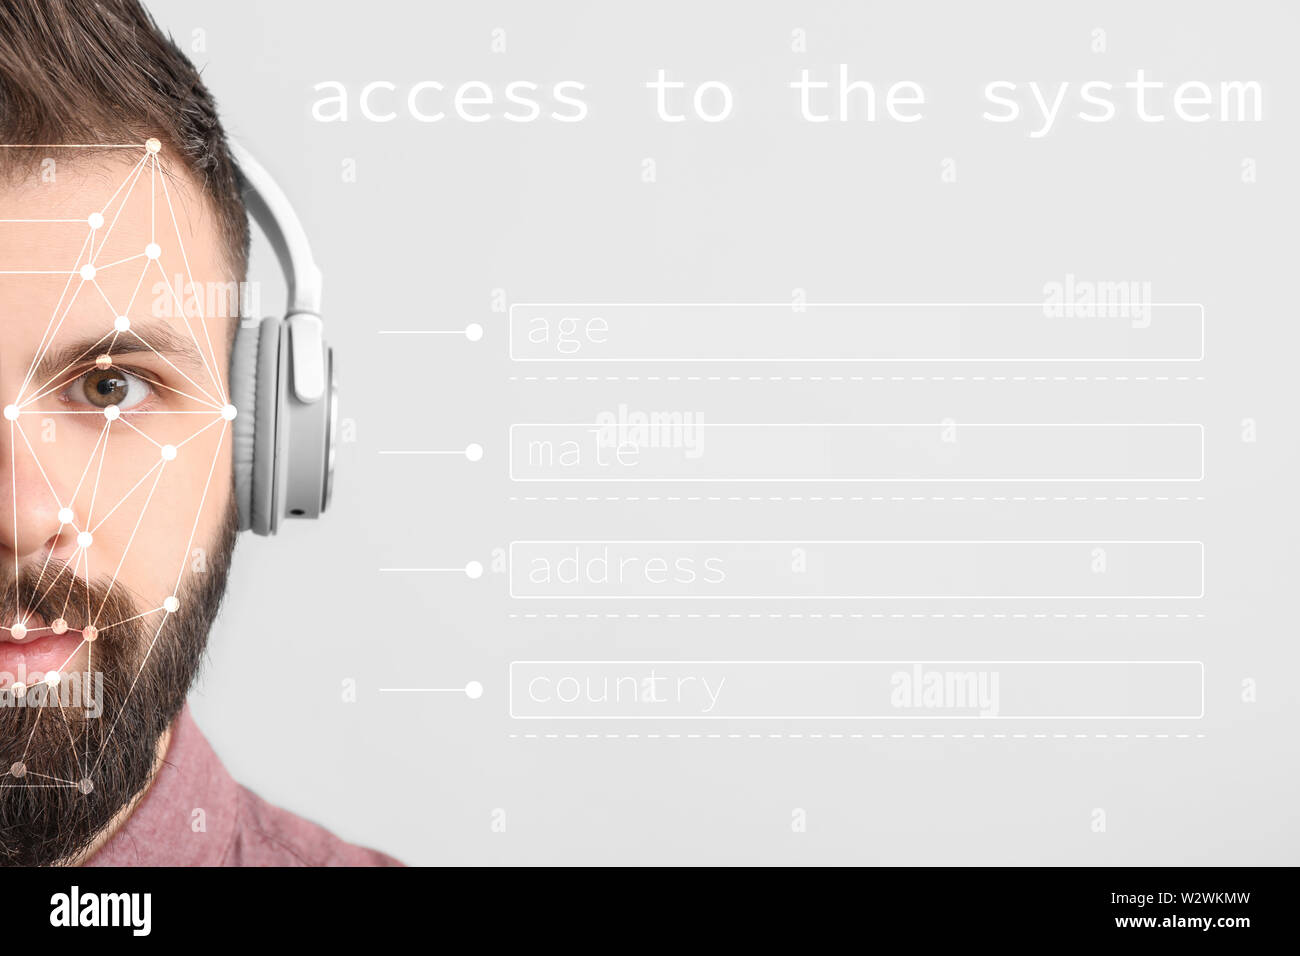 Male face and data-entry fields on light background. Concept of using facial recognition system Stock Photo